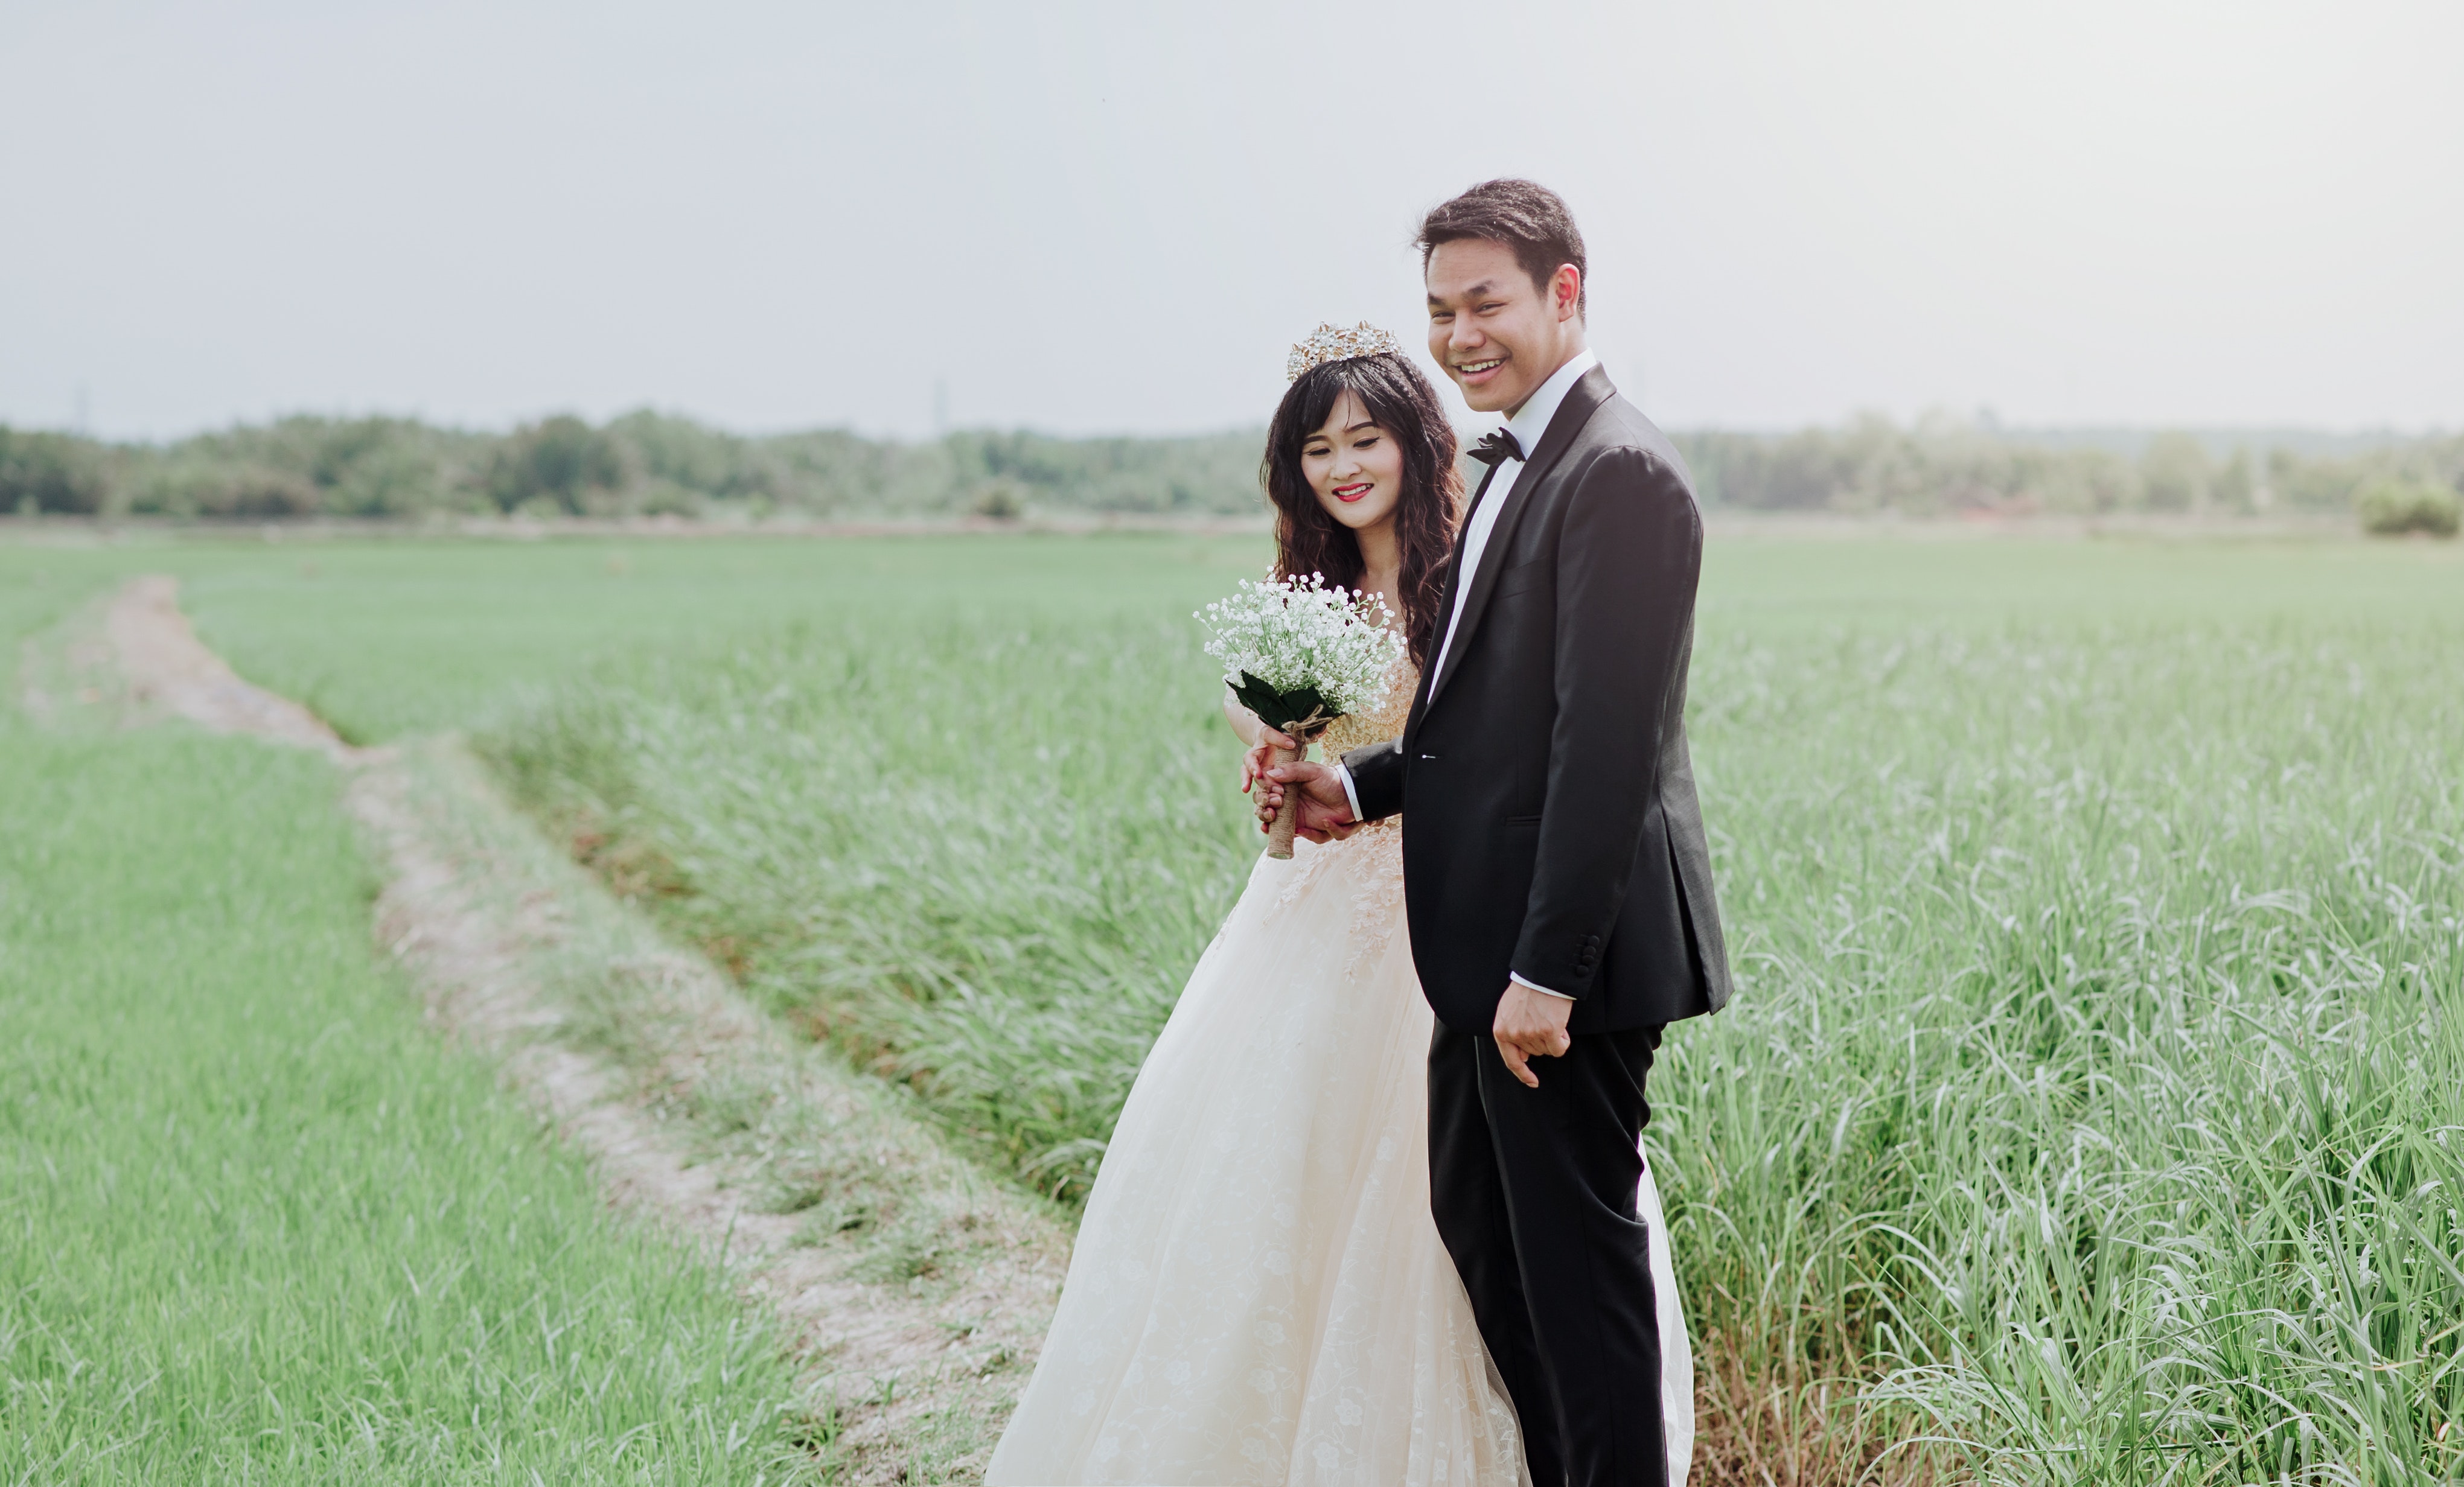 Man and woman wearing wedding dress and suit in between of rice fields photo